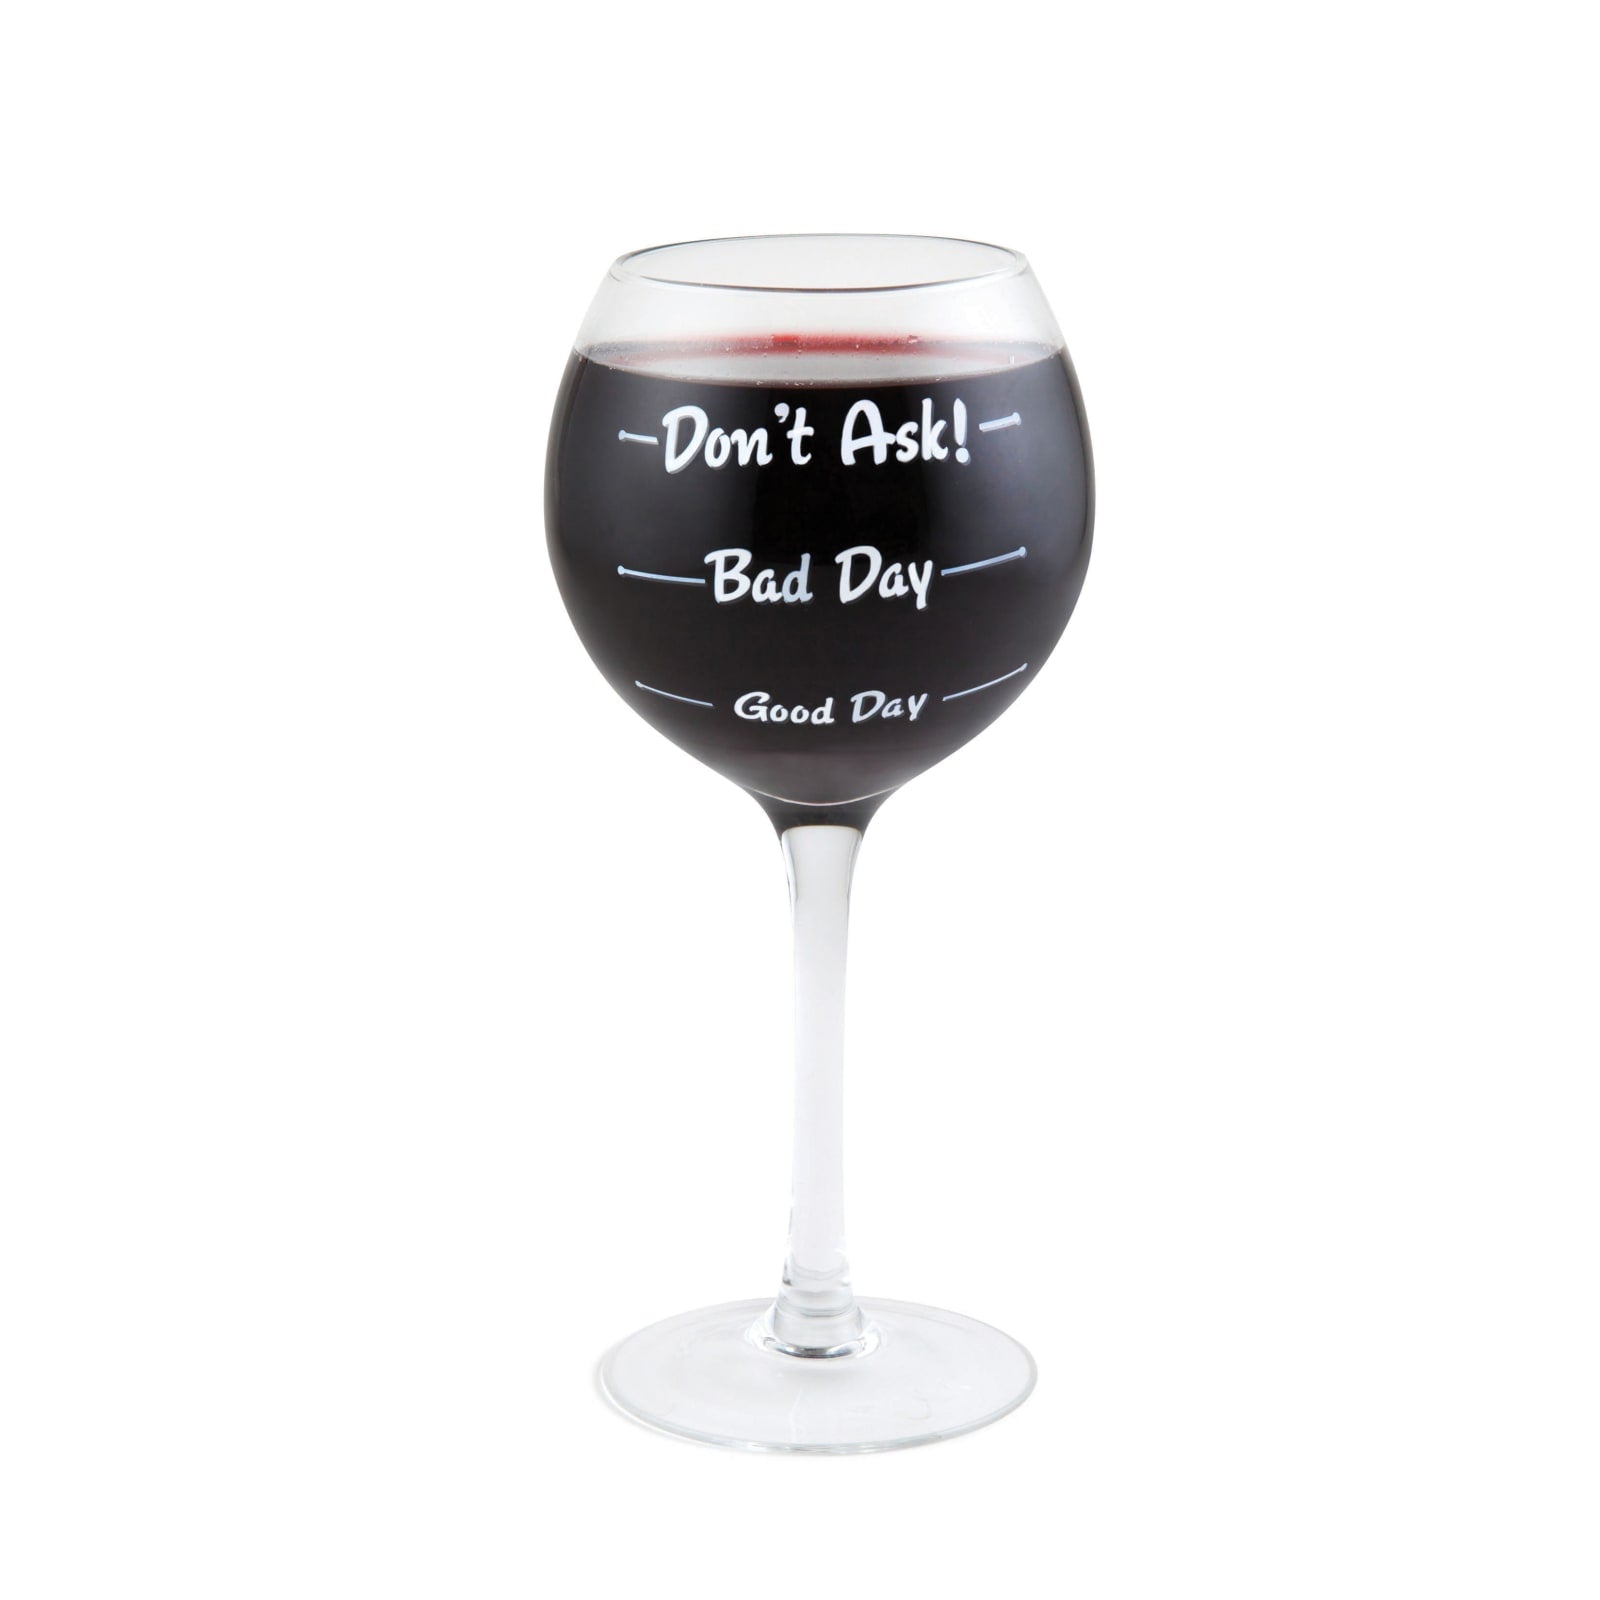 The How Was Your Day Wine Glass